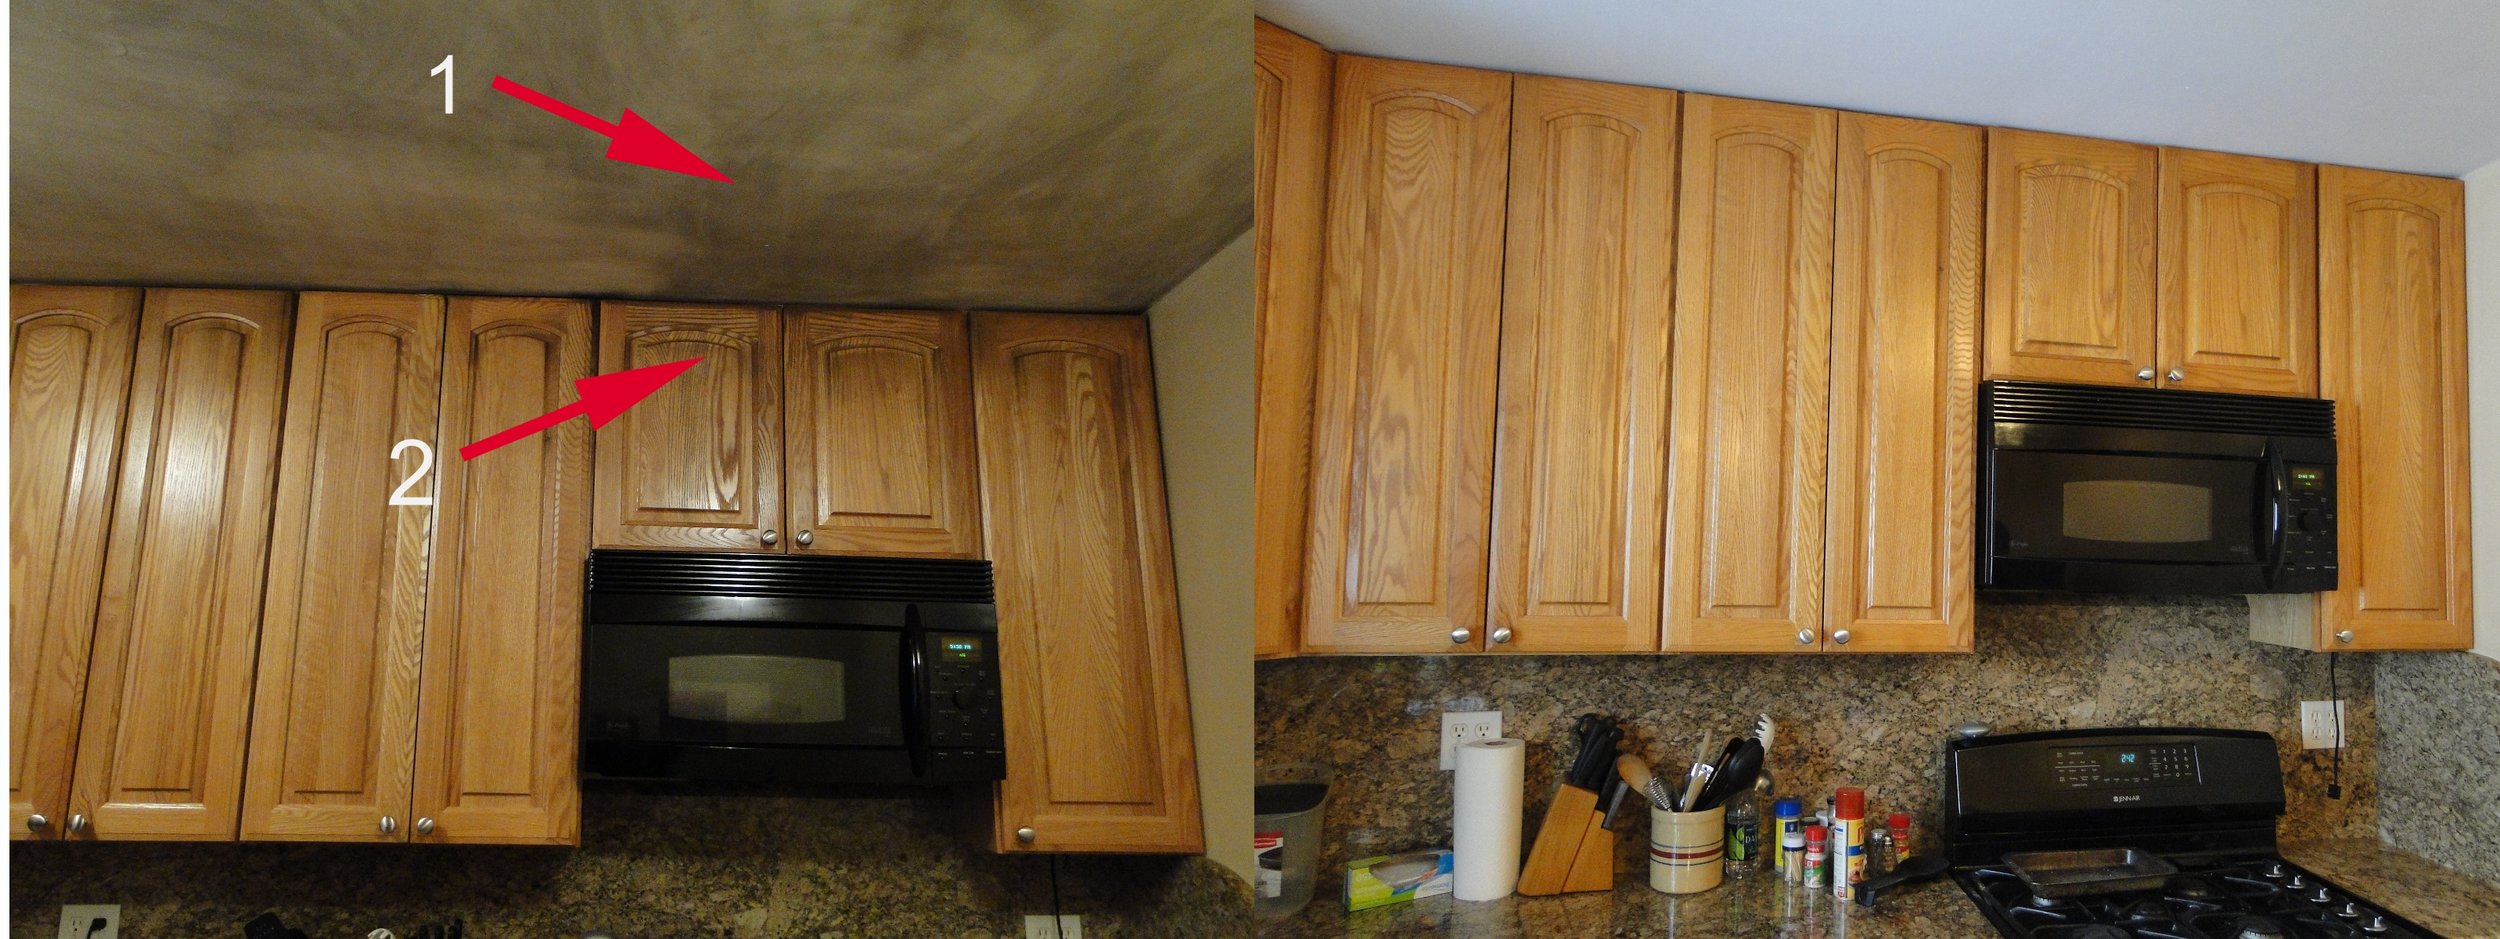 Cabinet Restoration Painting Old, Used Kitchen Cabinets Syracuse Ny